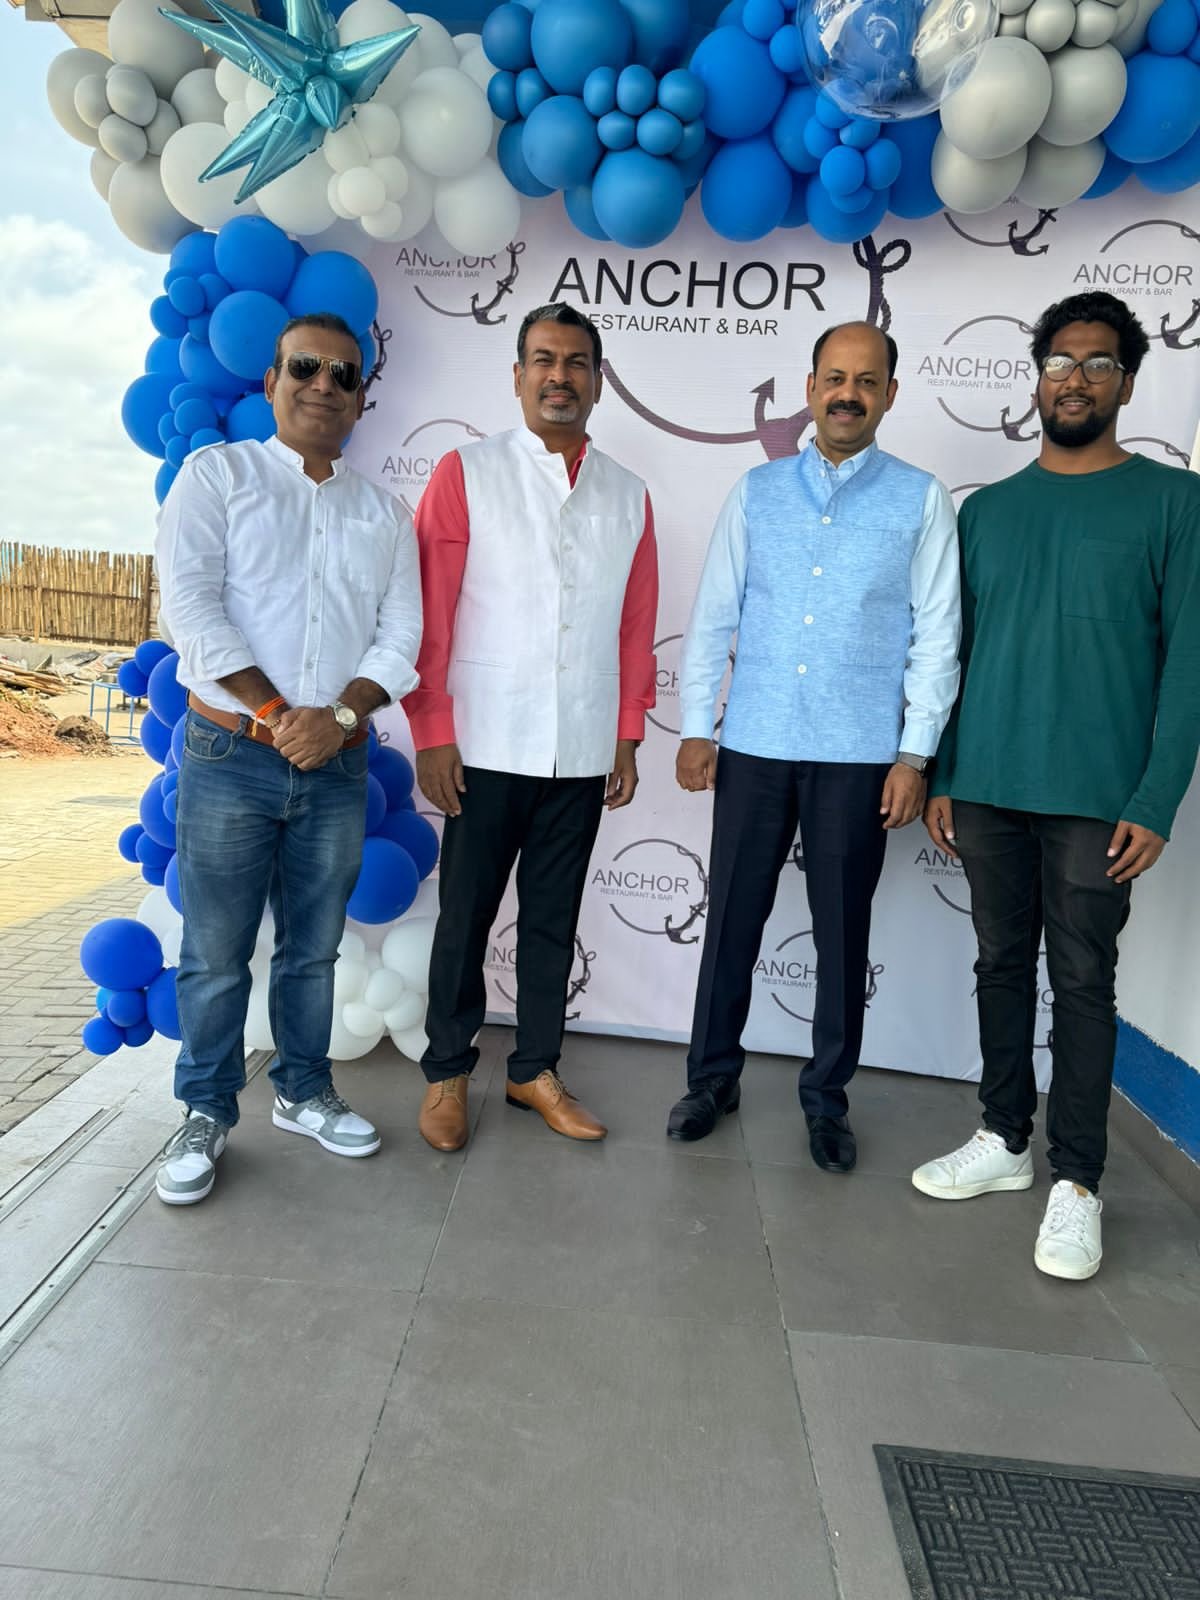 Indian envoy opens Afro-Asian restaurant, “Anchor”, in Lagos